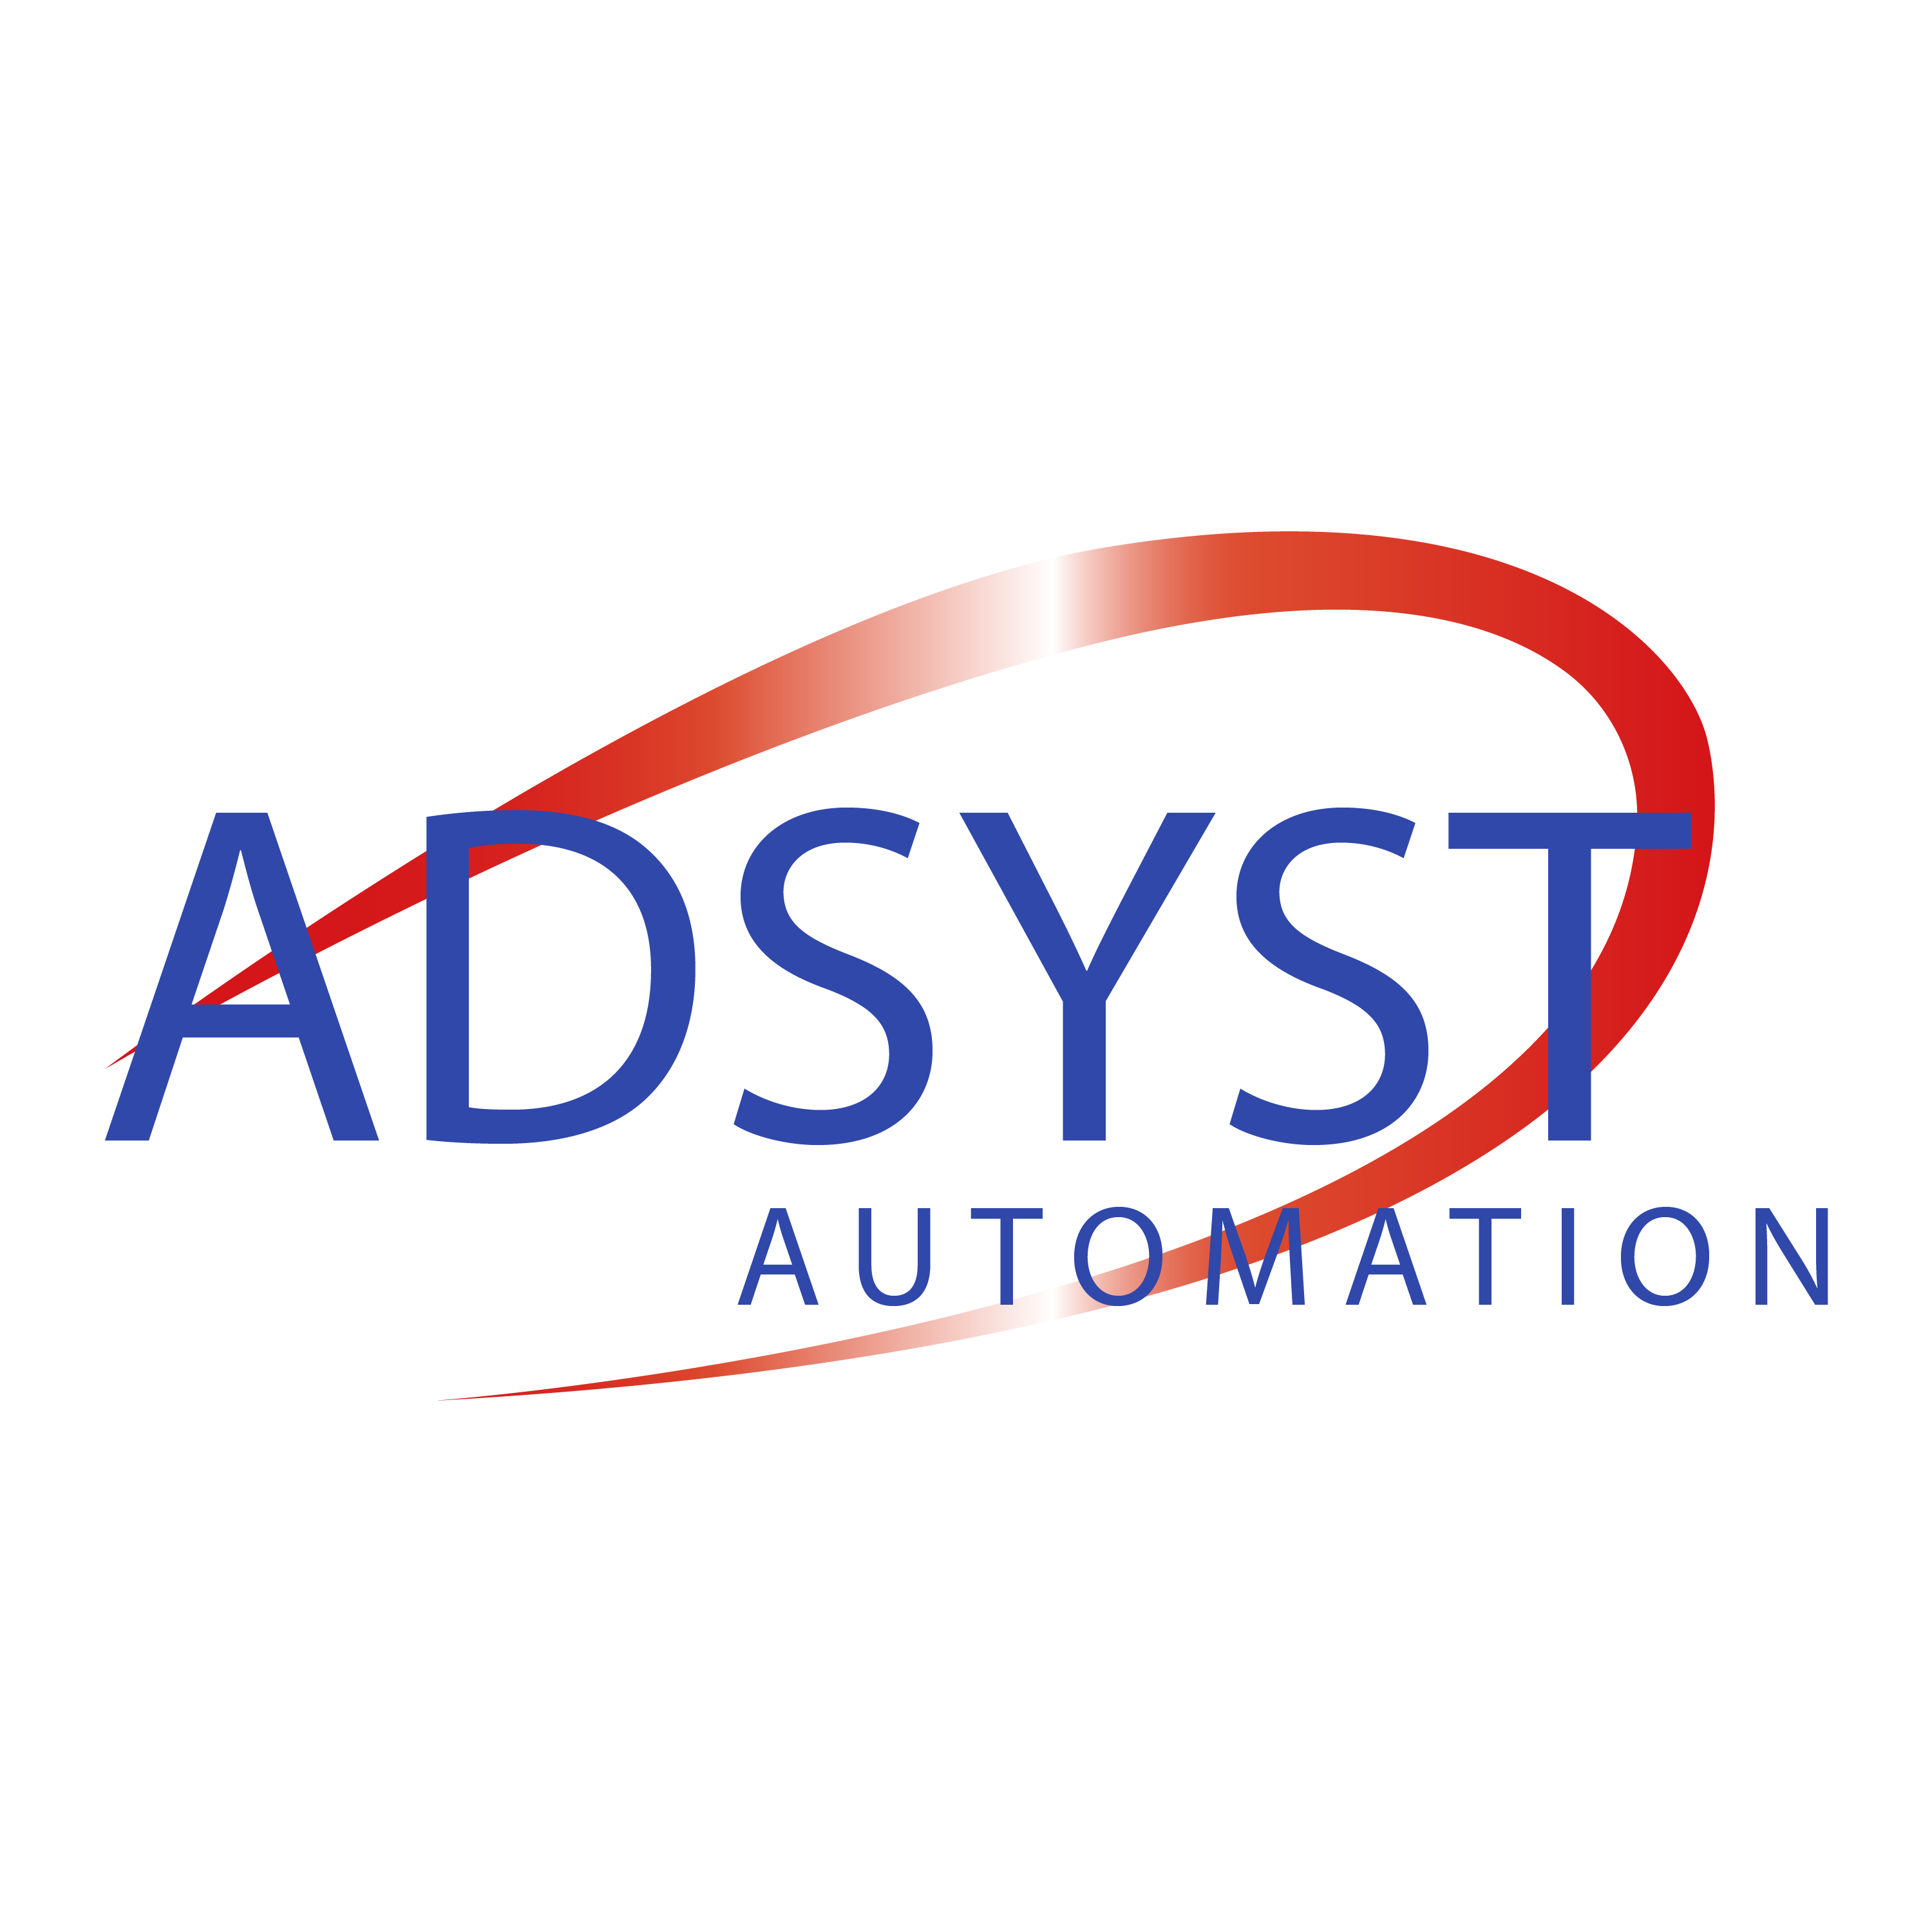 ADSYST (Automation) Limited